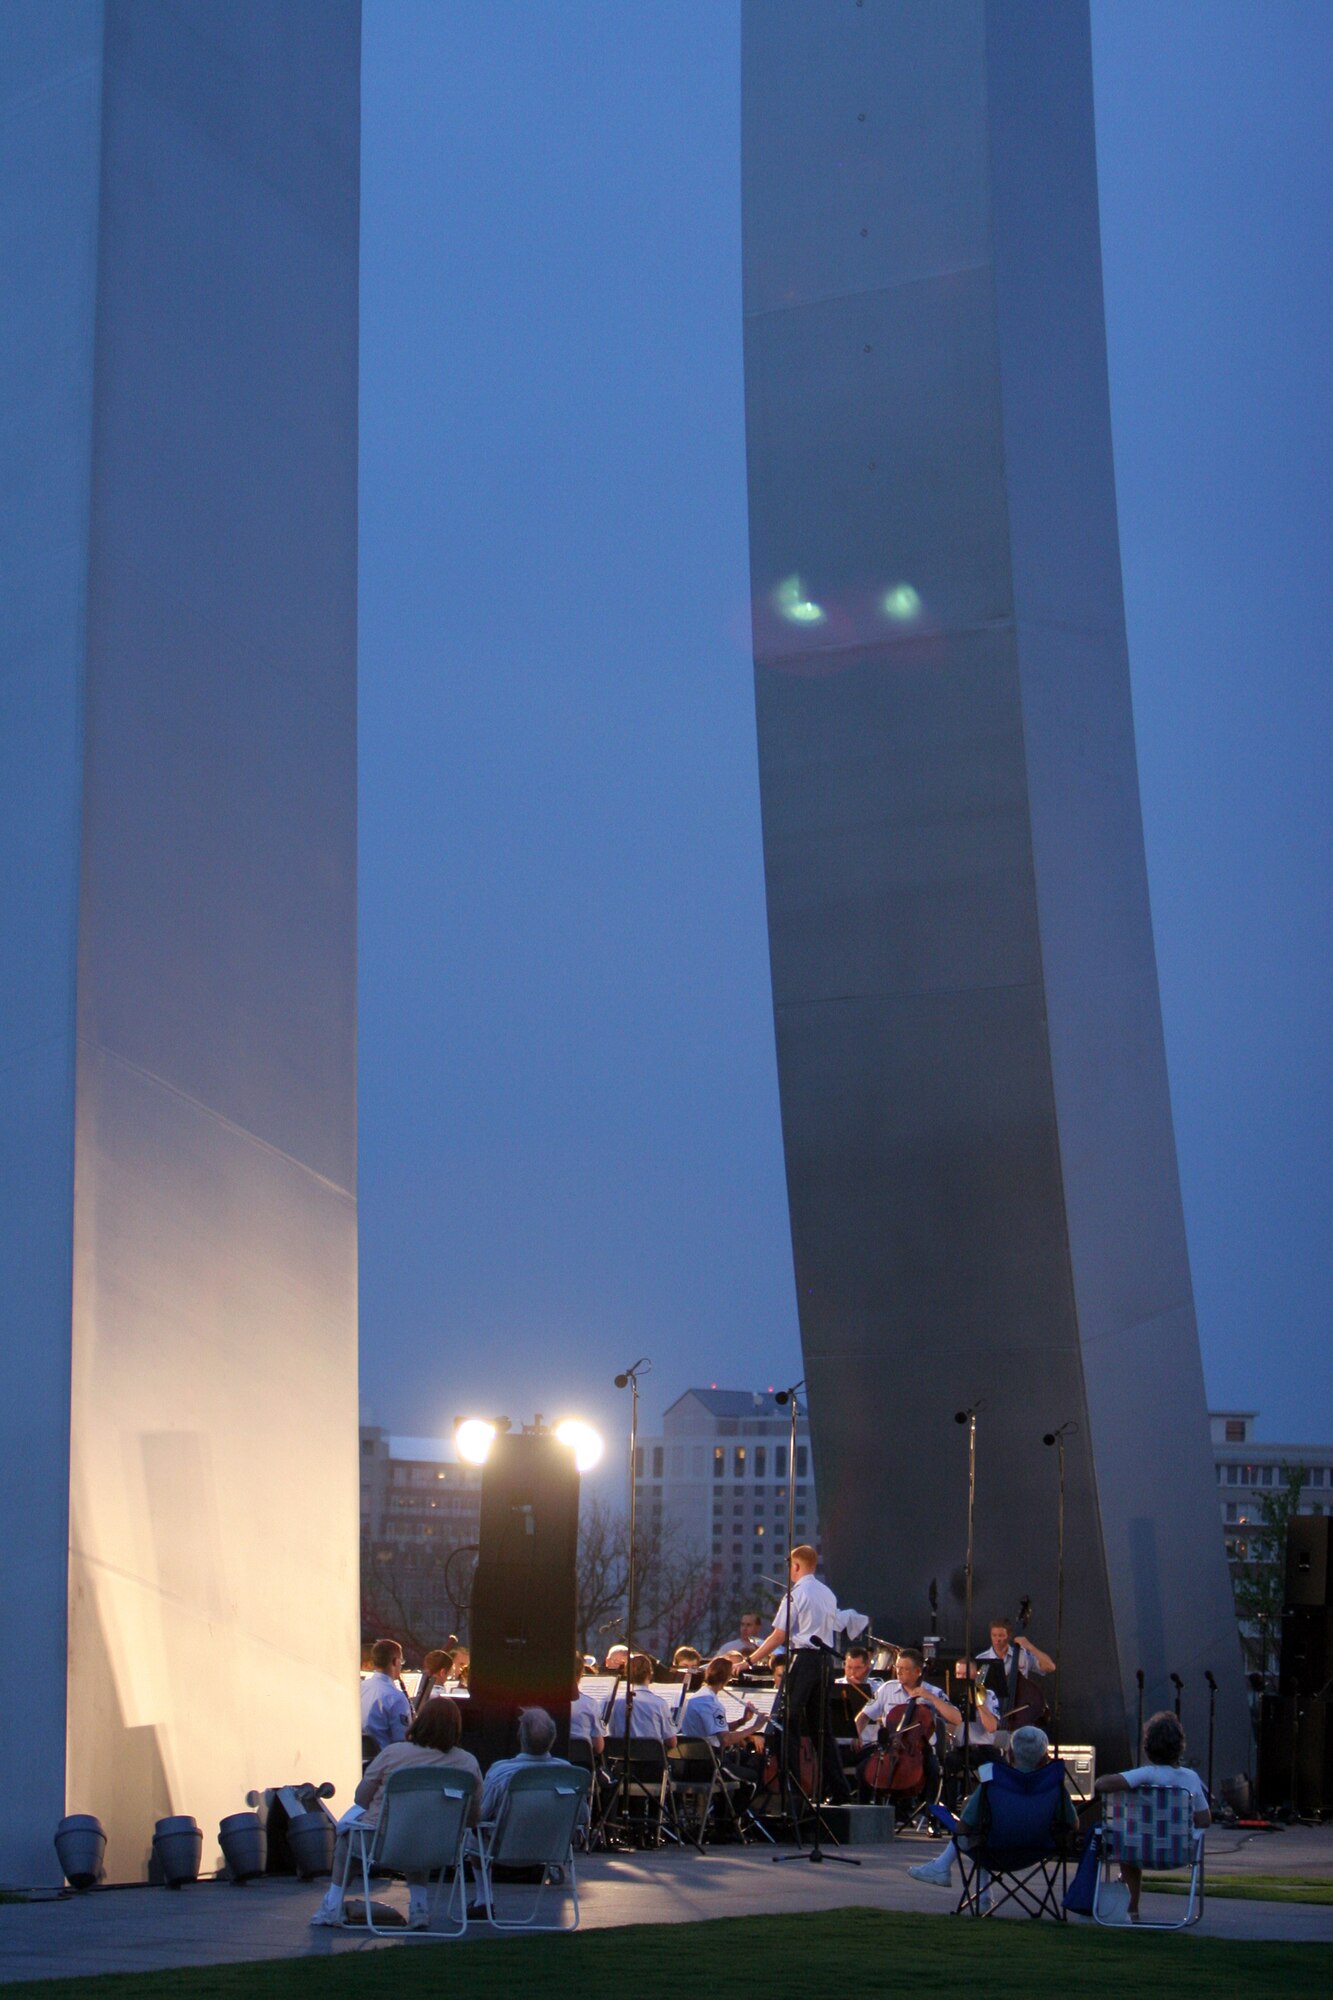 Captain Michael Murray conducts the USAF Concert Band at the Air Force Memorial in August 2007. During the summer months, different components of the USAF Band provide free public concerts at the base of the Air Force Memorial in Arlington, Va. (Official Air Force photo by Senior Master Sgt. Robert Mesite)